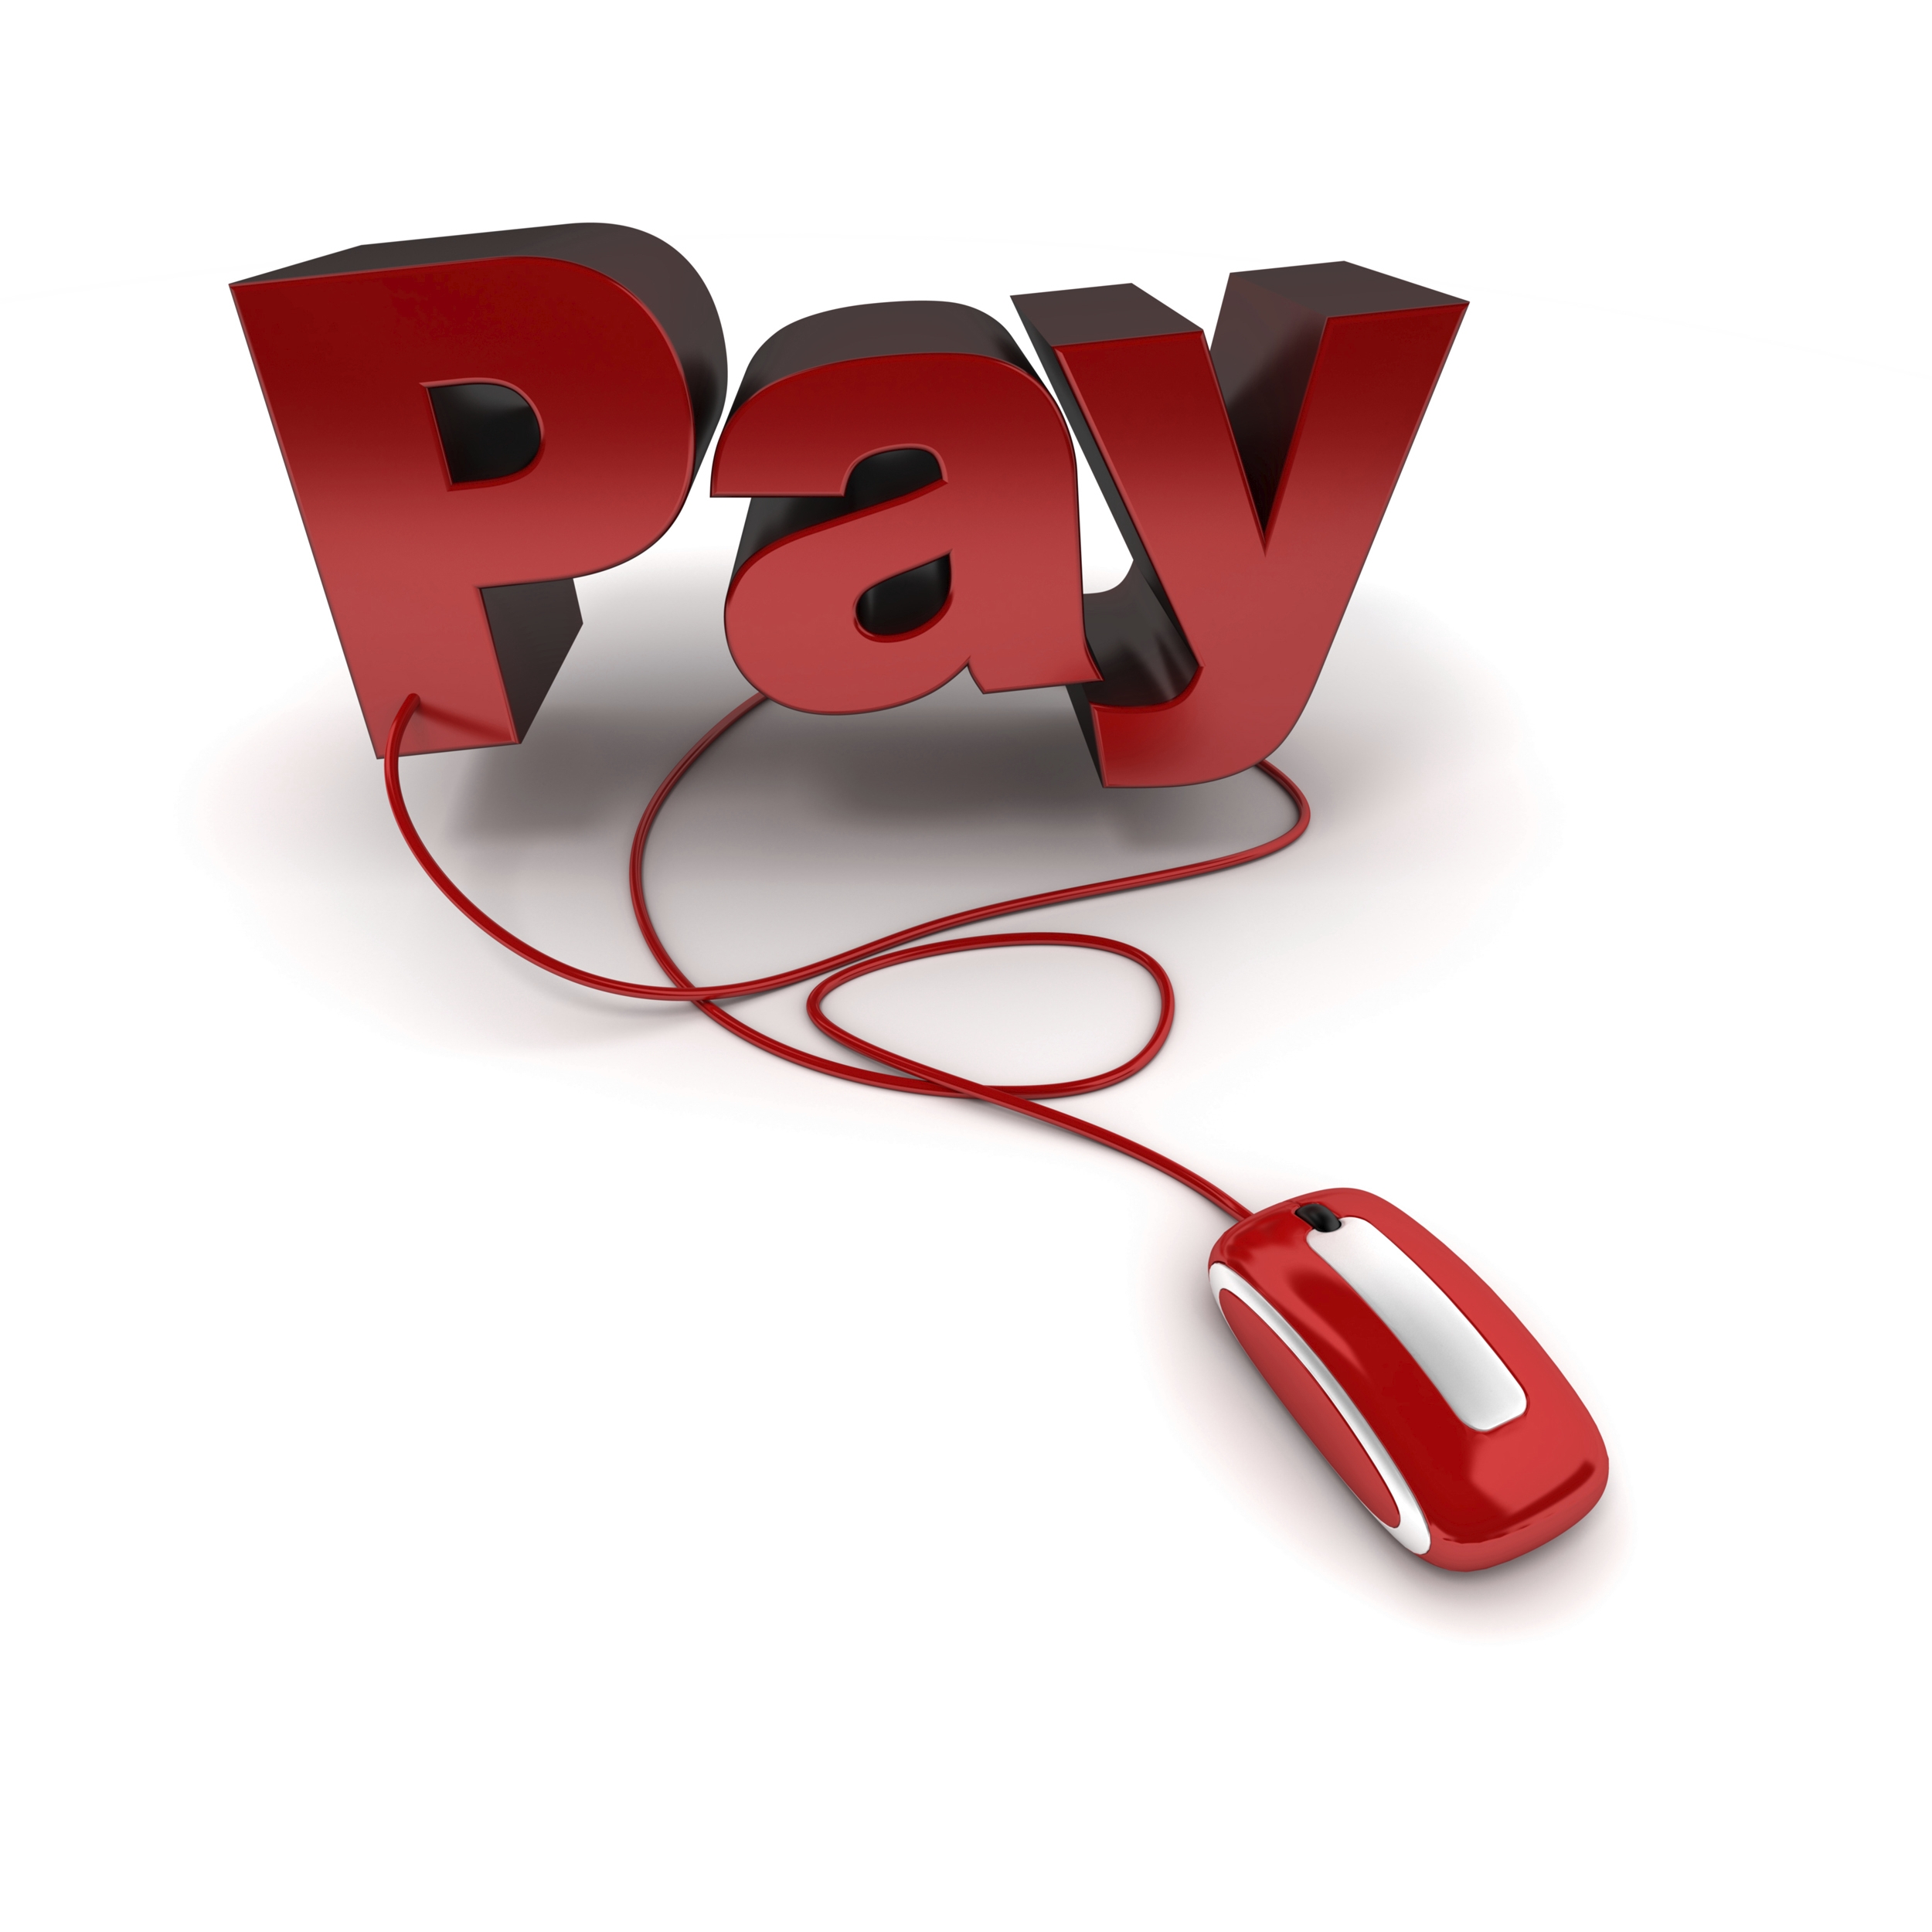 Pay Online Payment